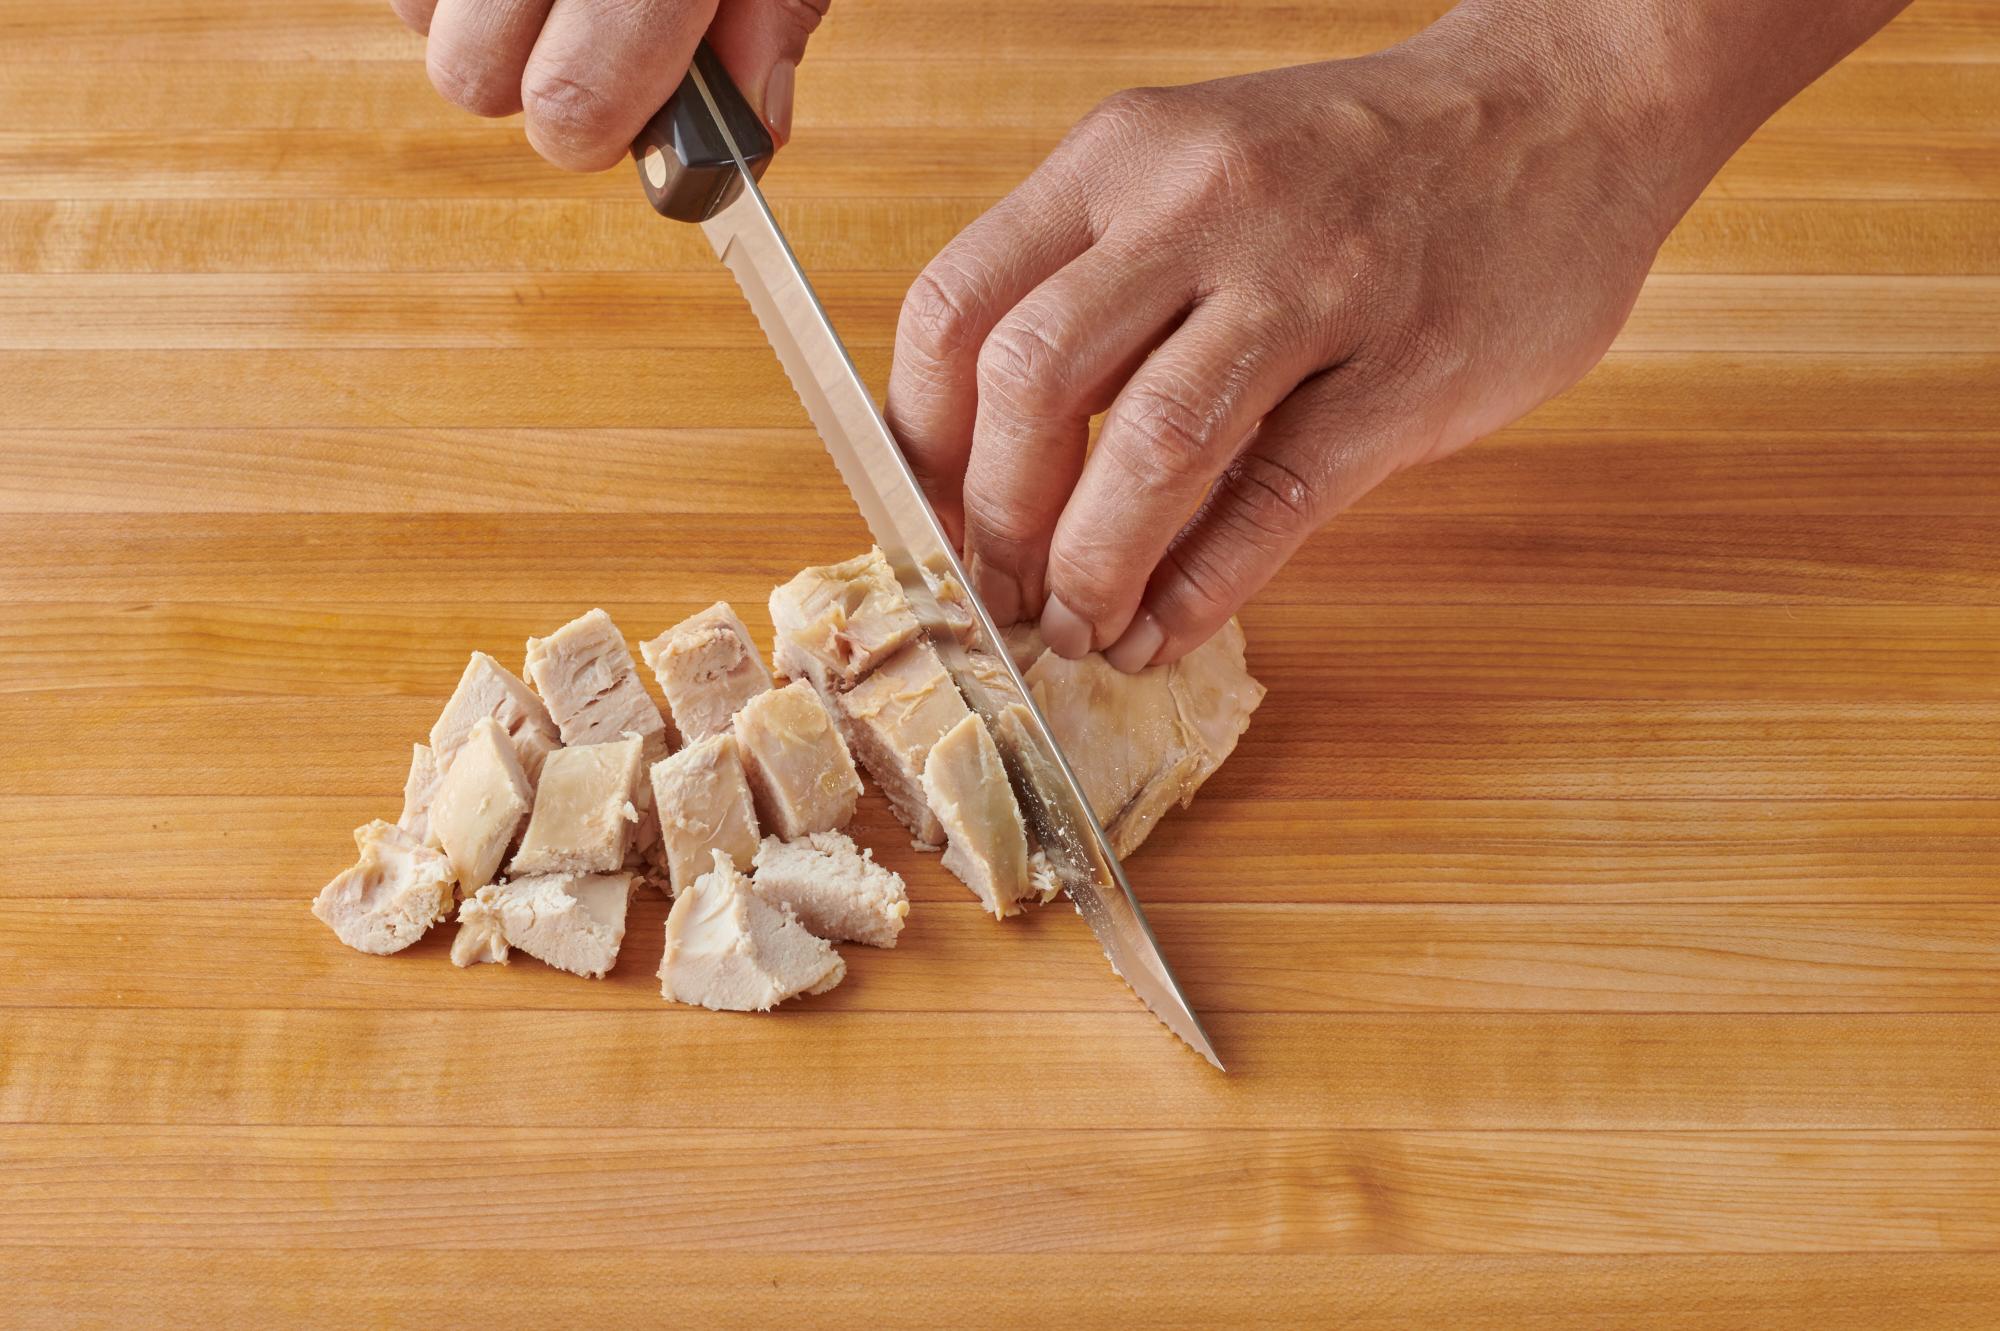 Using a Petite Carver to cut the chicken into cubes.